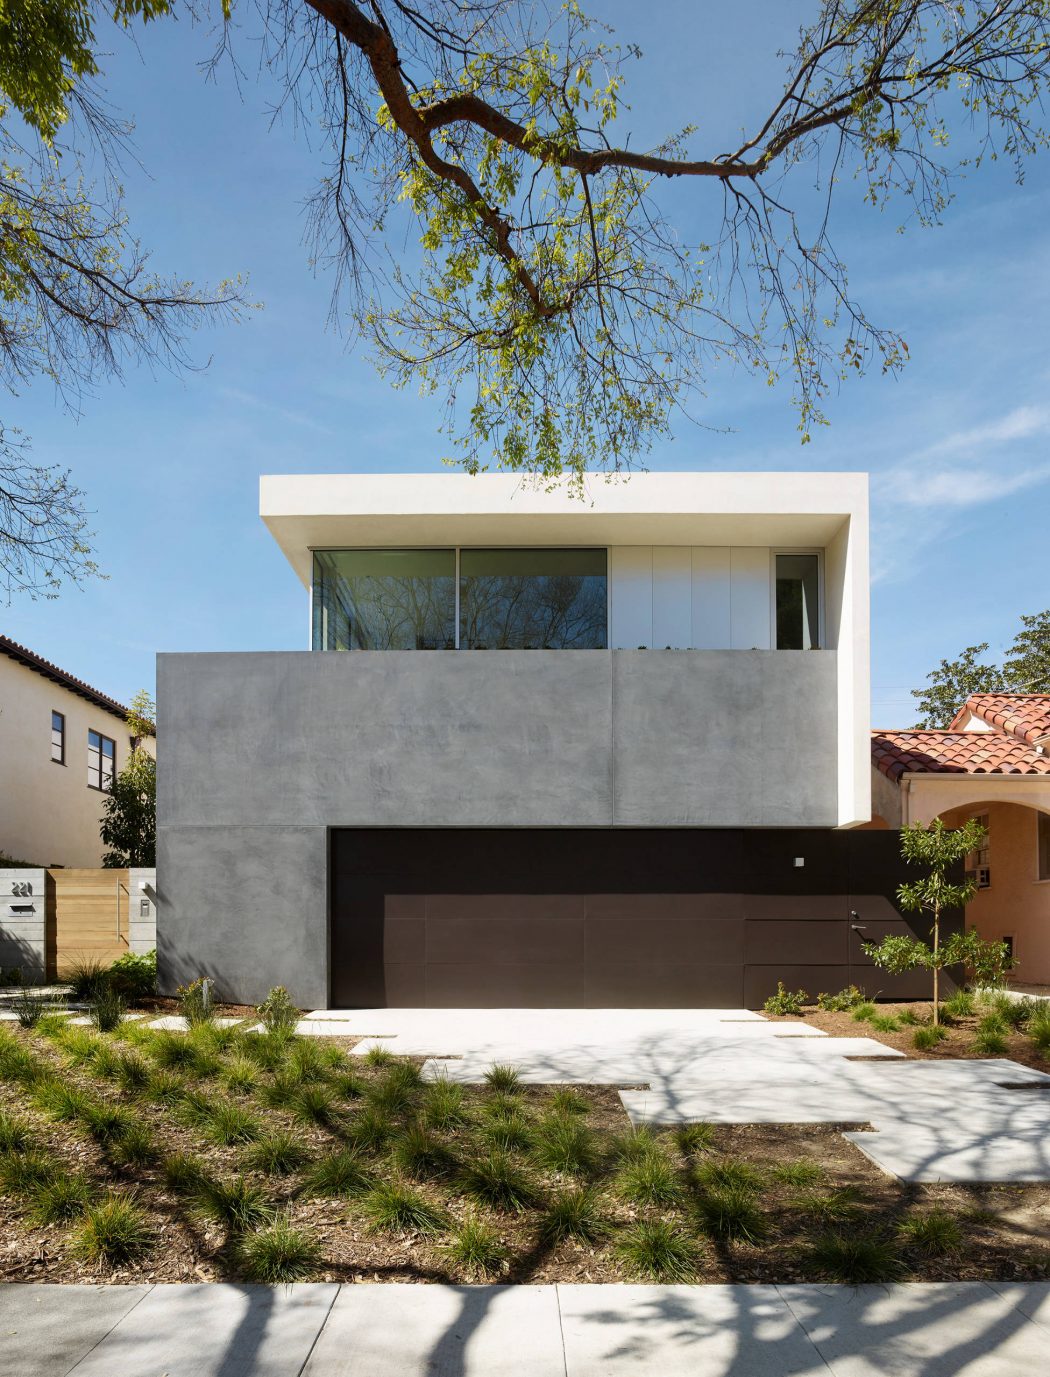 Modern, minimalist house with a geometric facade, large windows, and a contrasting garage door.